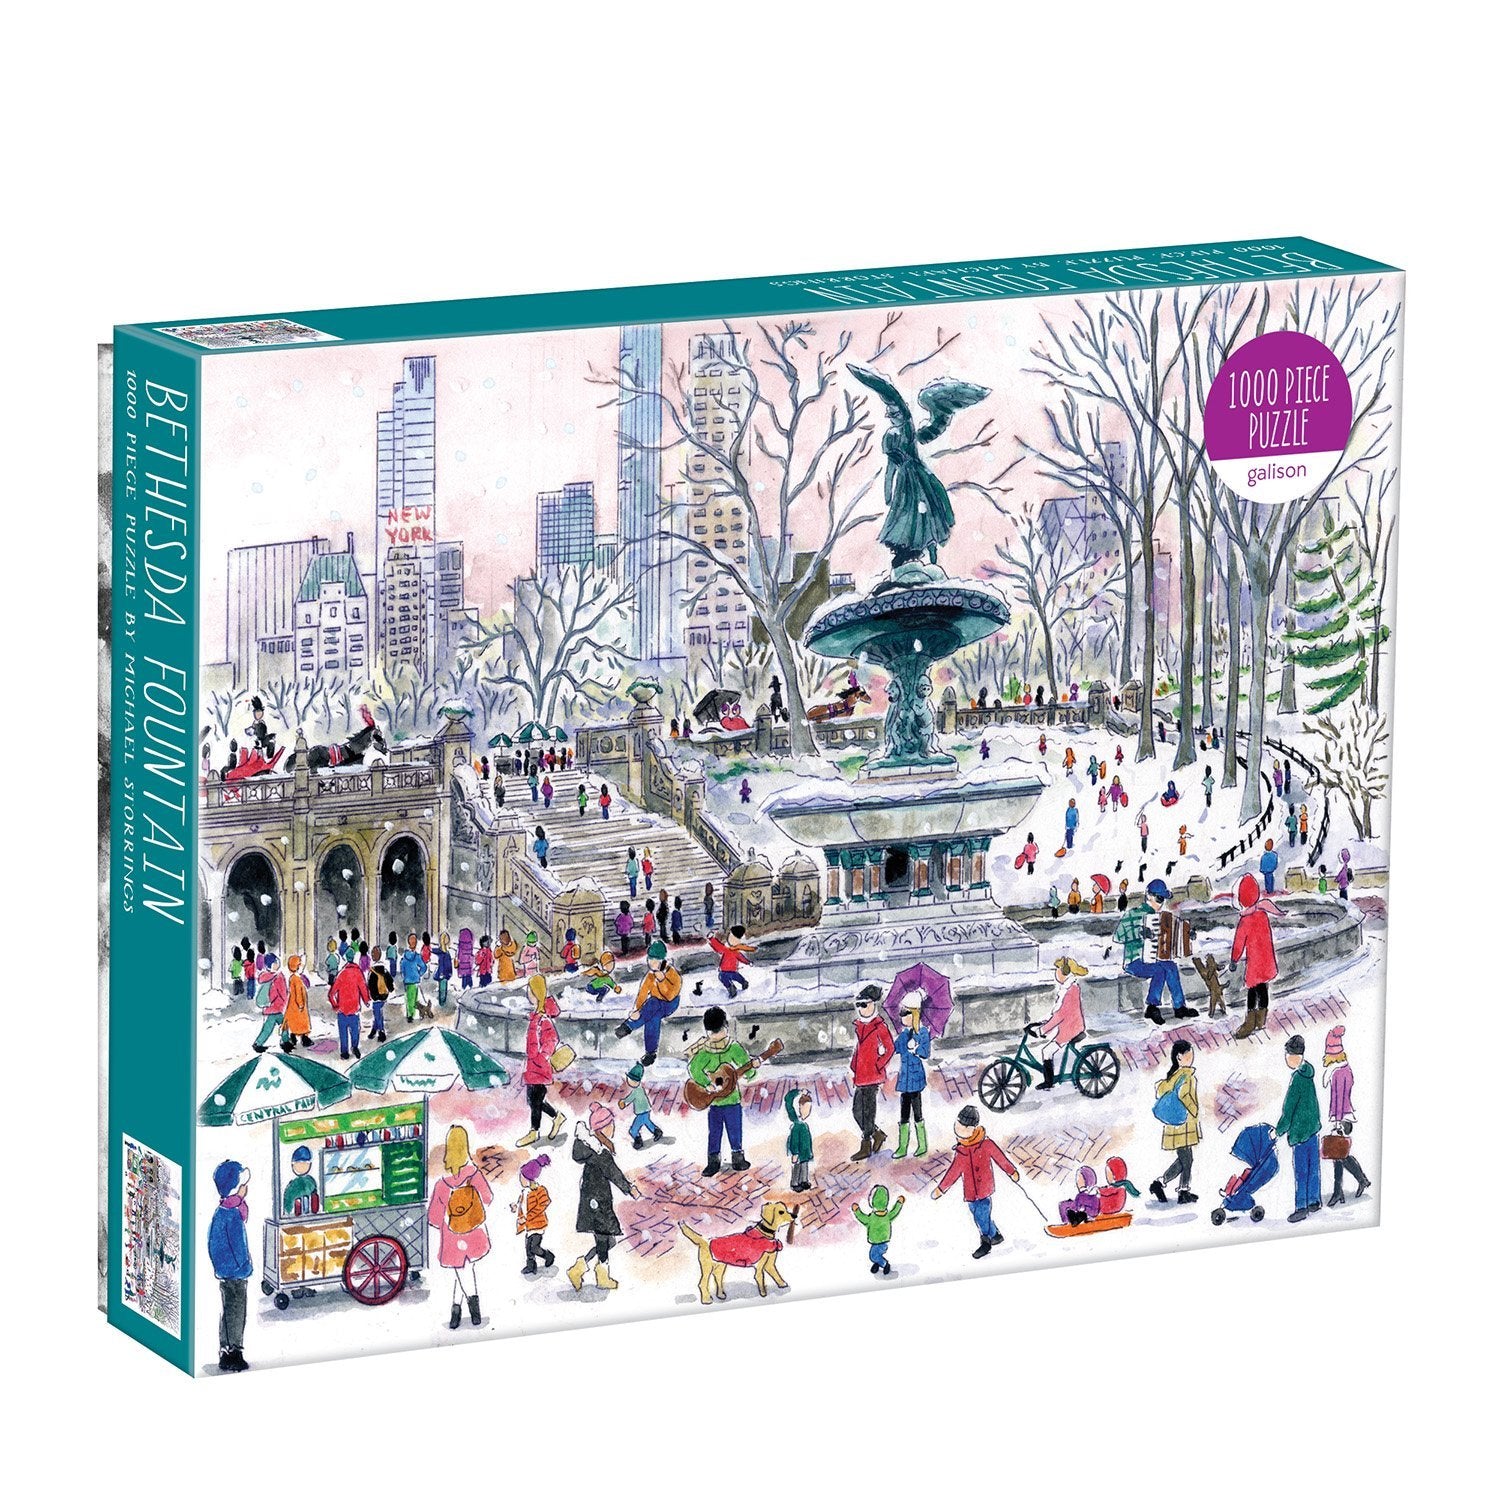 Bethesda Fountain by Michael Storrings (1000 pc puzzle)